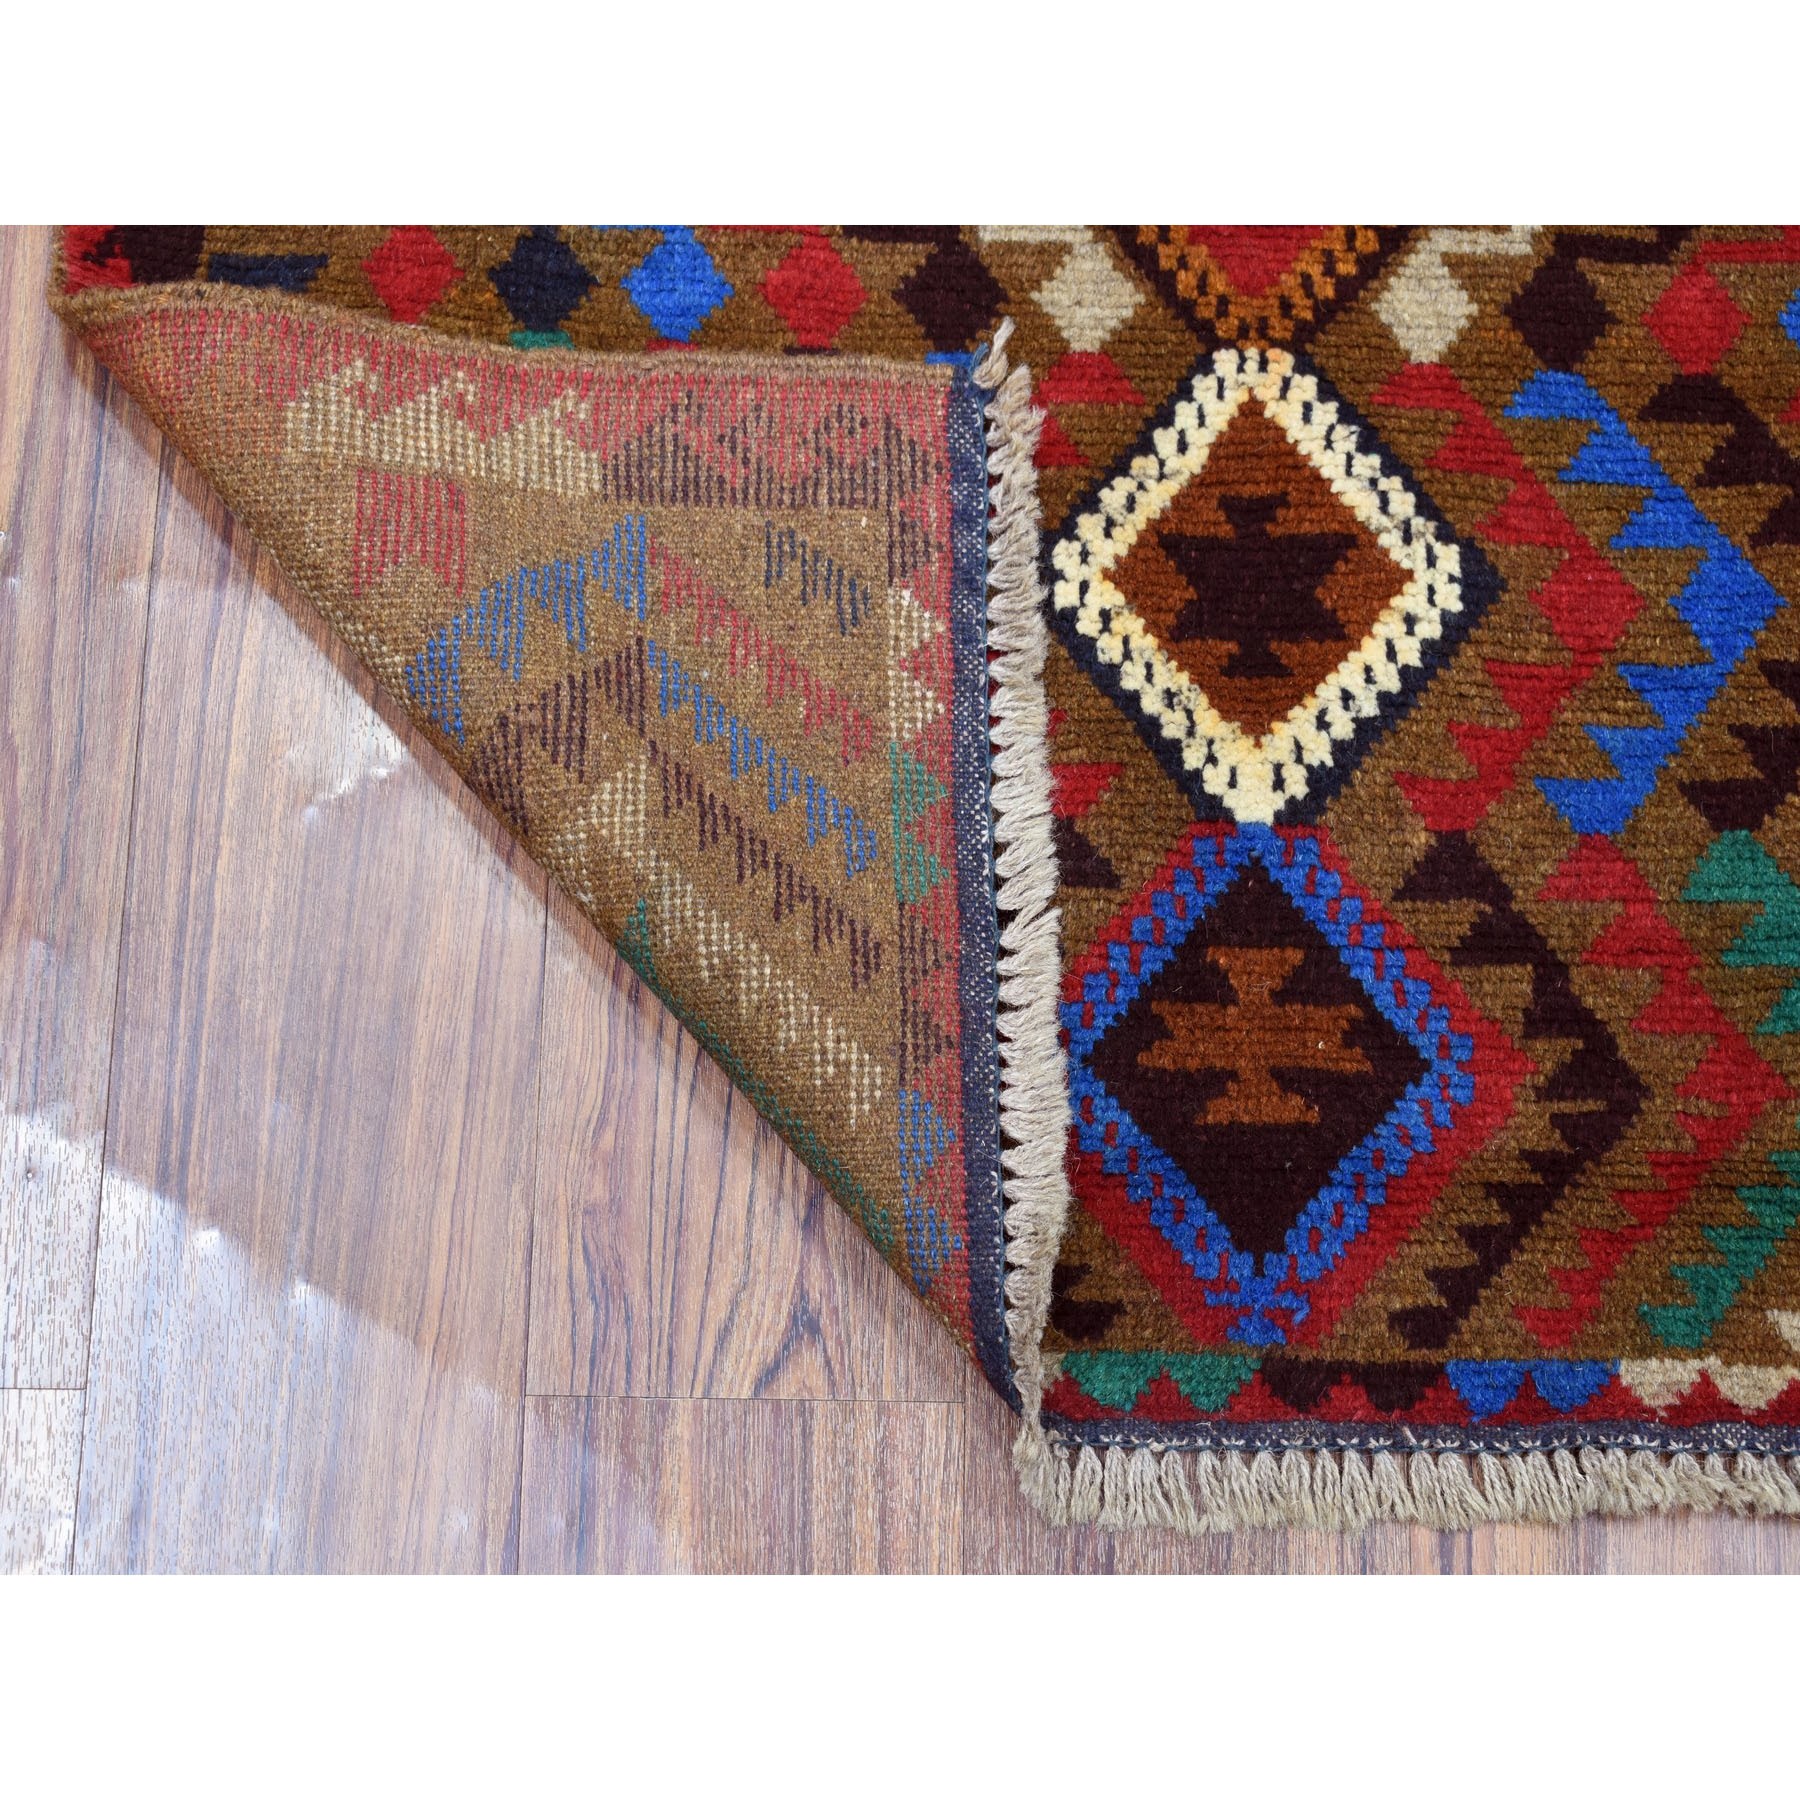 3'x4'6" Brown Hand Woven Tribal Design Colorful Afghan Baluch Pure Wool Oriental Rug 